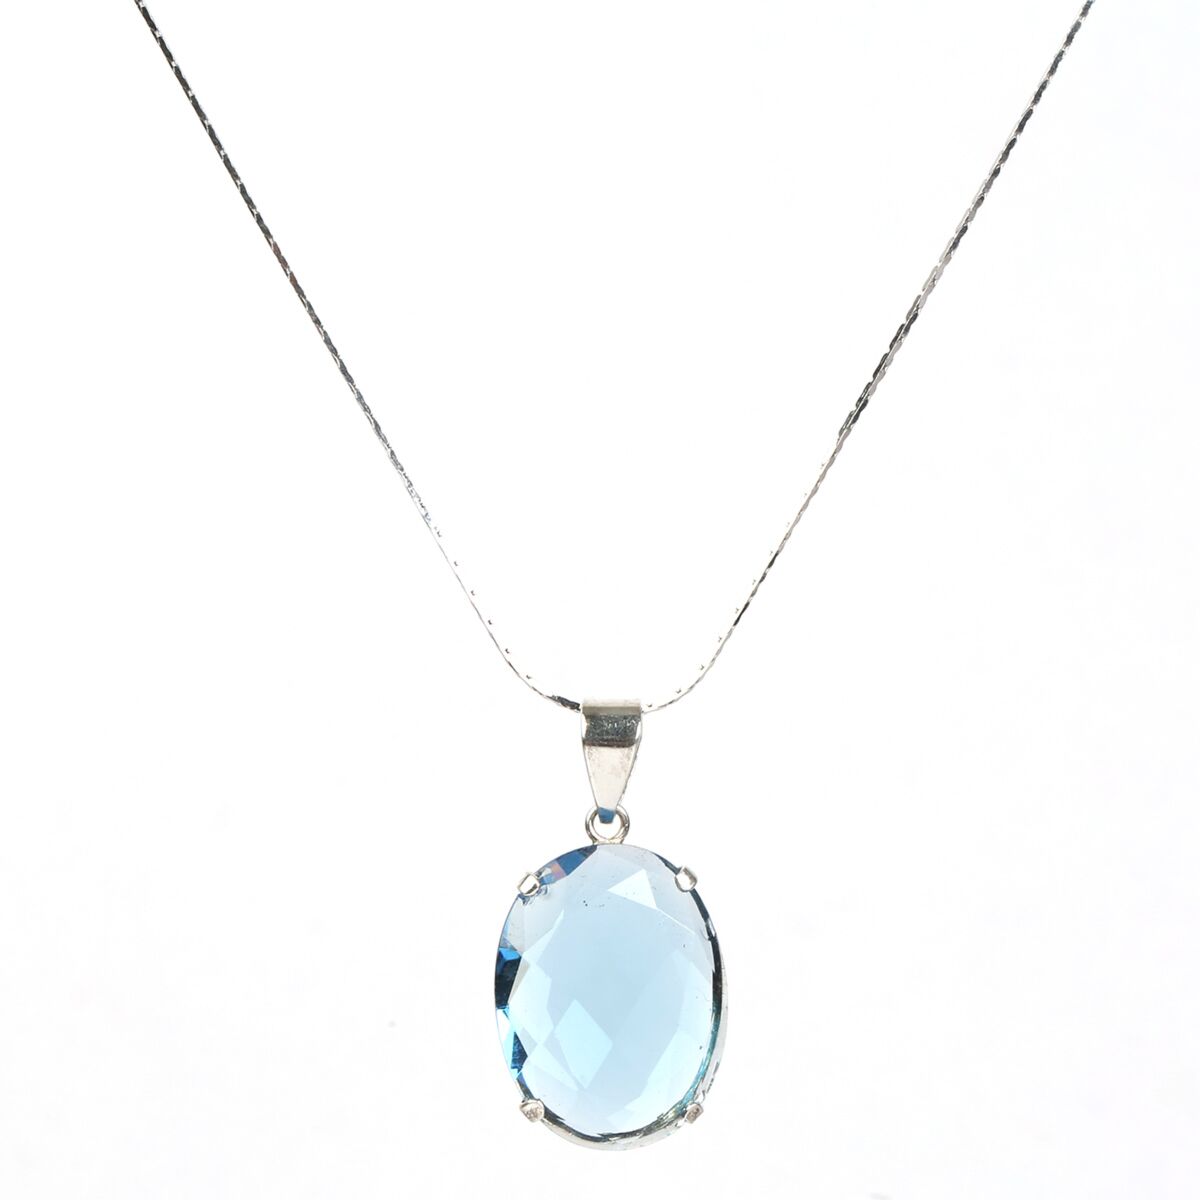 Blue Topaz Pendant Necklace| Afghan Style Female Necklace